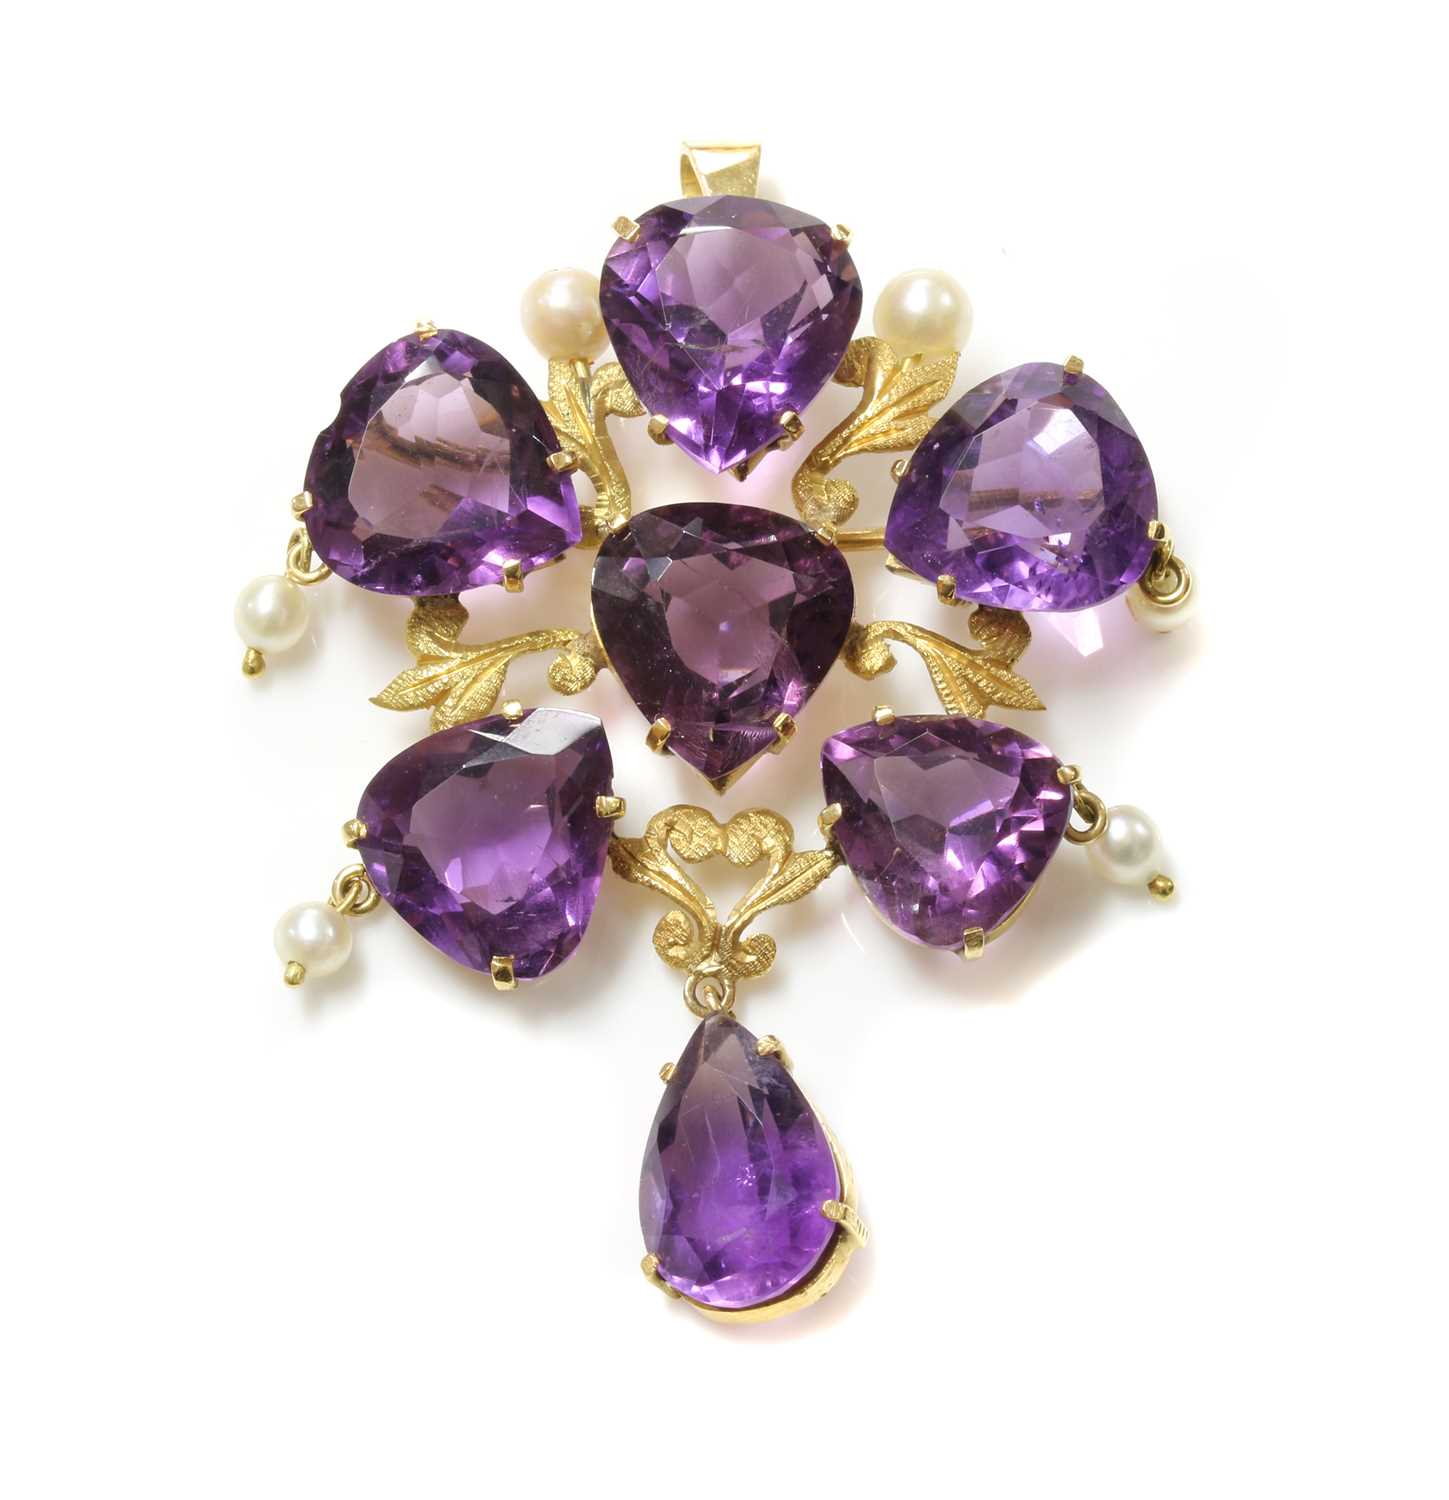 Lot 186 - A Continental gold amethyst and cultured pearl brooch/pendant